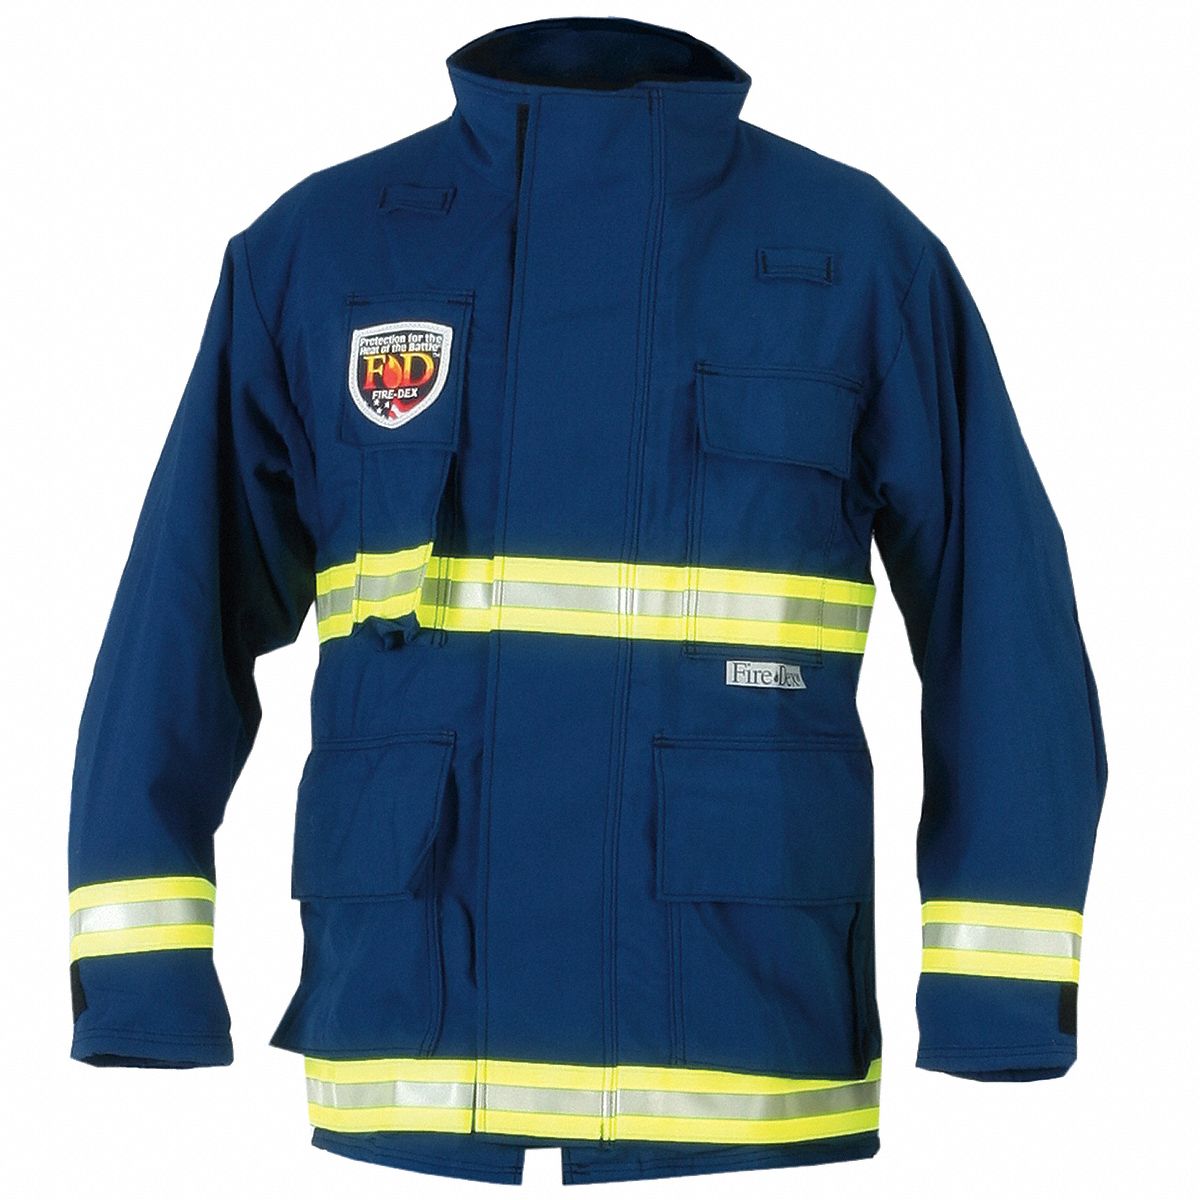 EMS Jacket: 2XL, 54 in Fits Chest Size, Navy